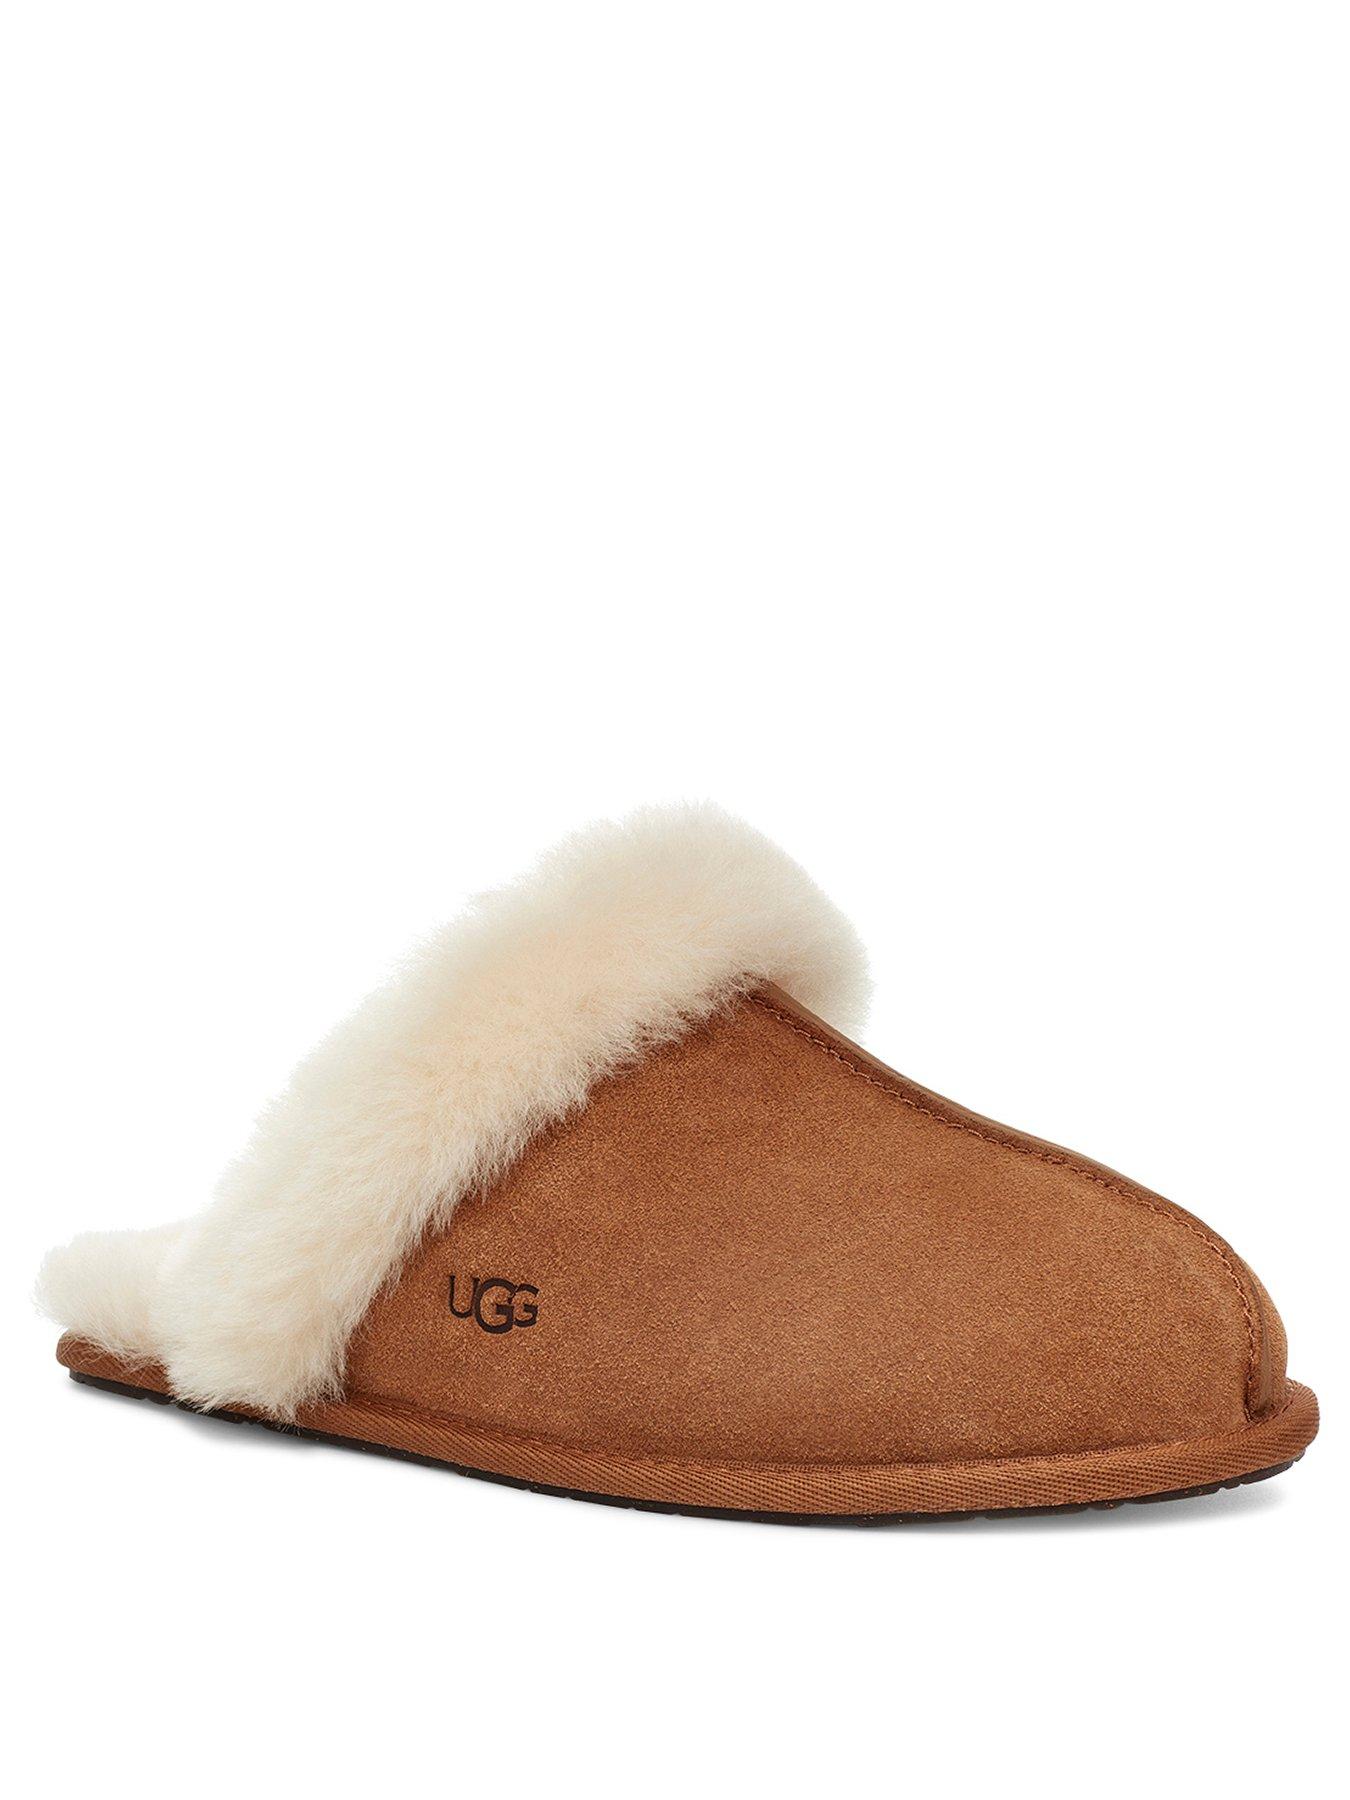 discount ugg slippers uk